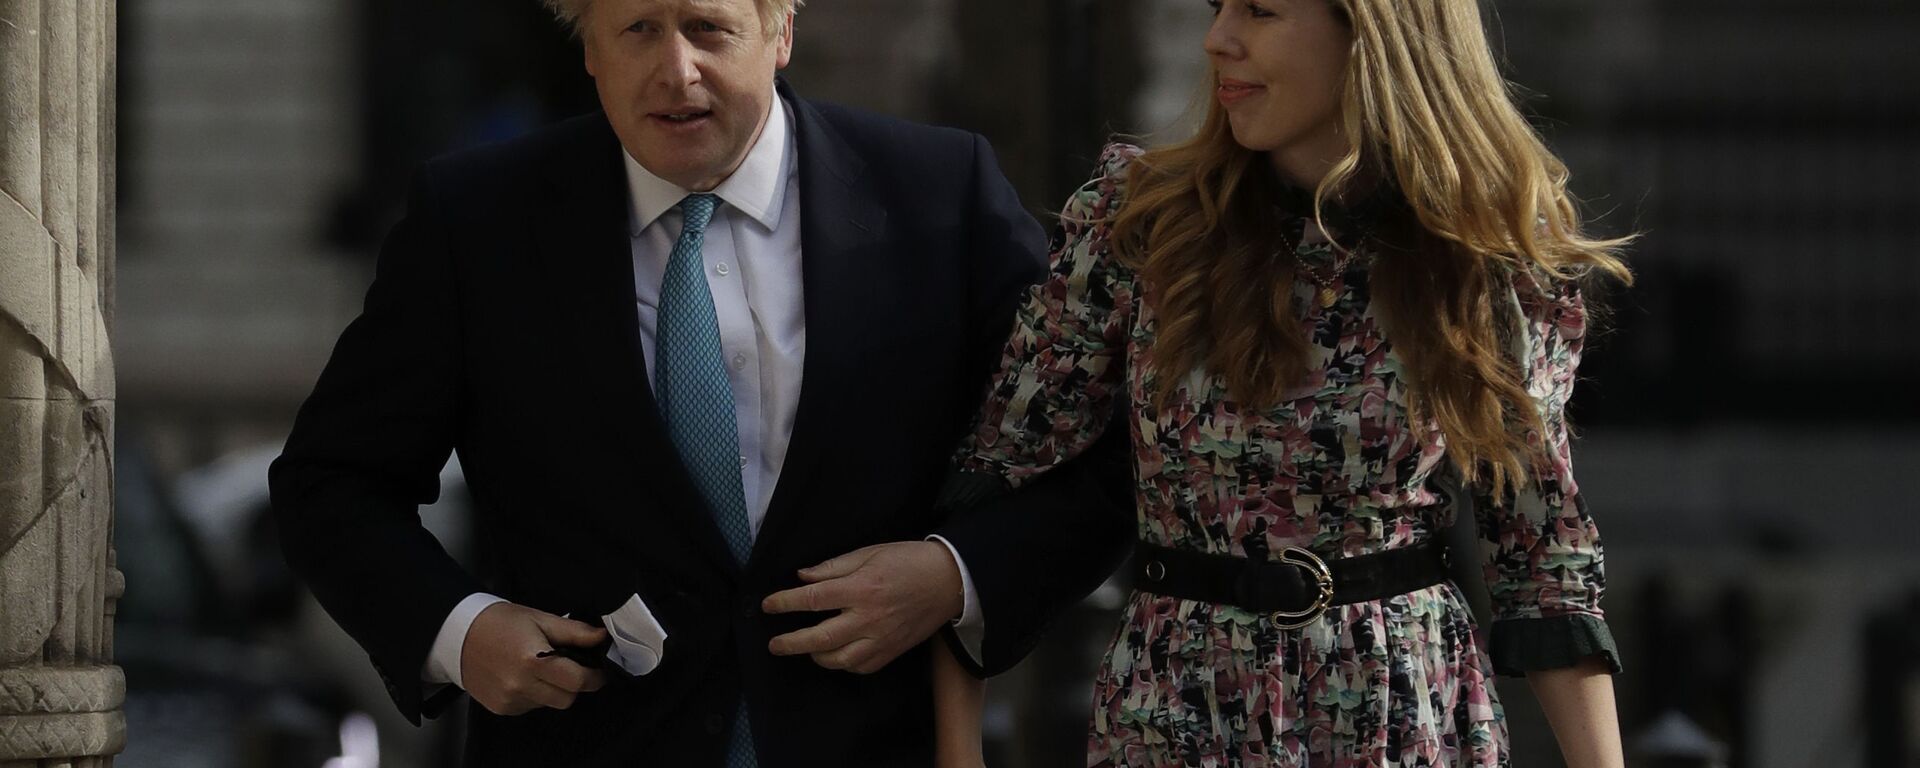 British Prime Minister Boris Johnson arrives at a polling station with his partner Carrie Symonds to cast his vote in local council elections in London, Thursday May 6, 2021 - Sputnik International, 1920, 13.05.2021